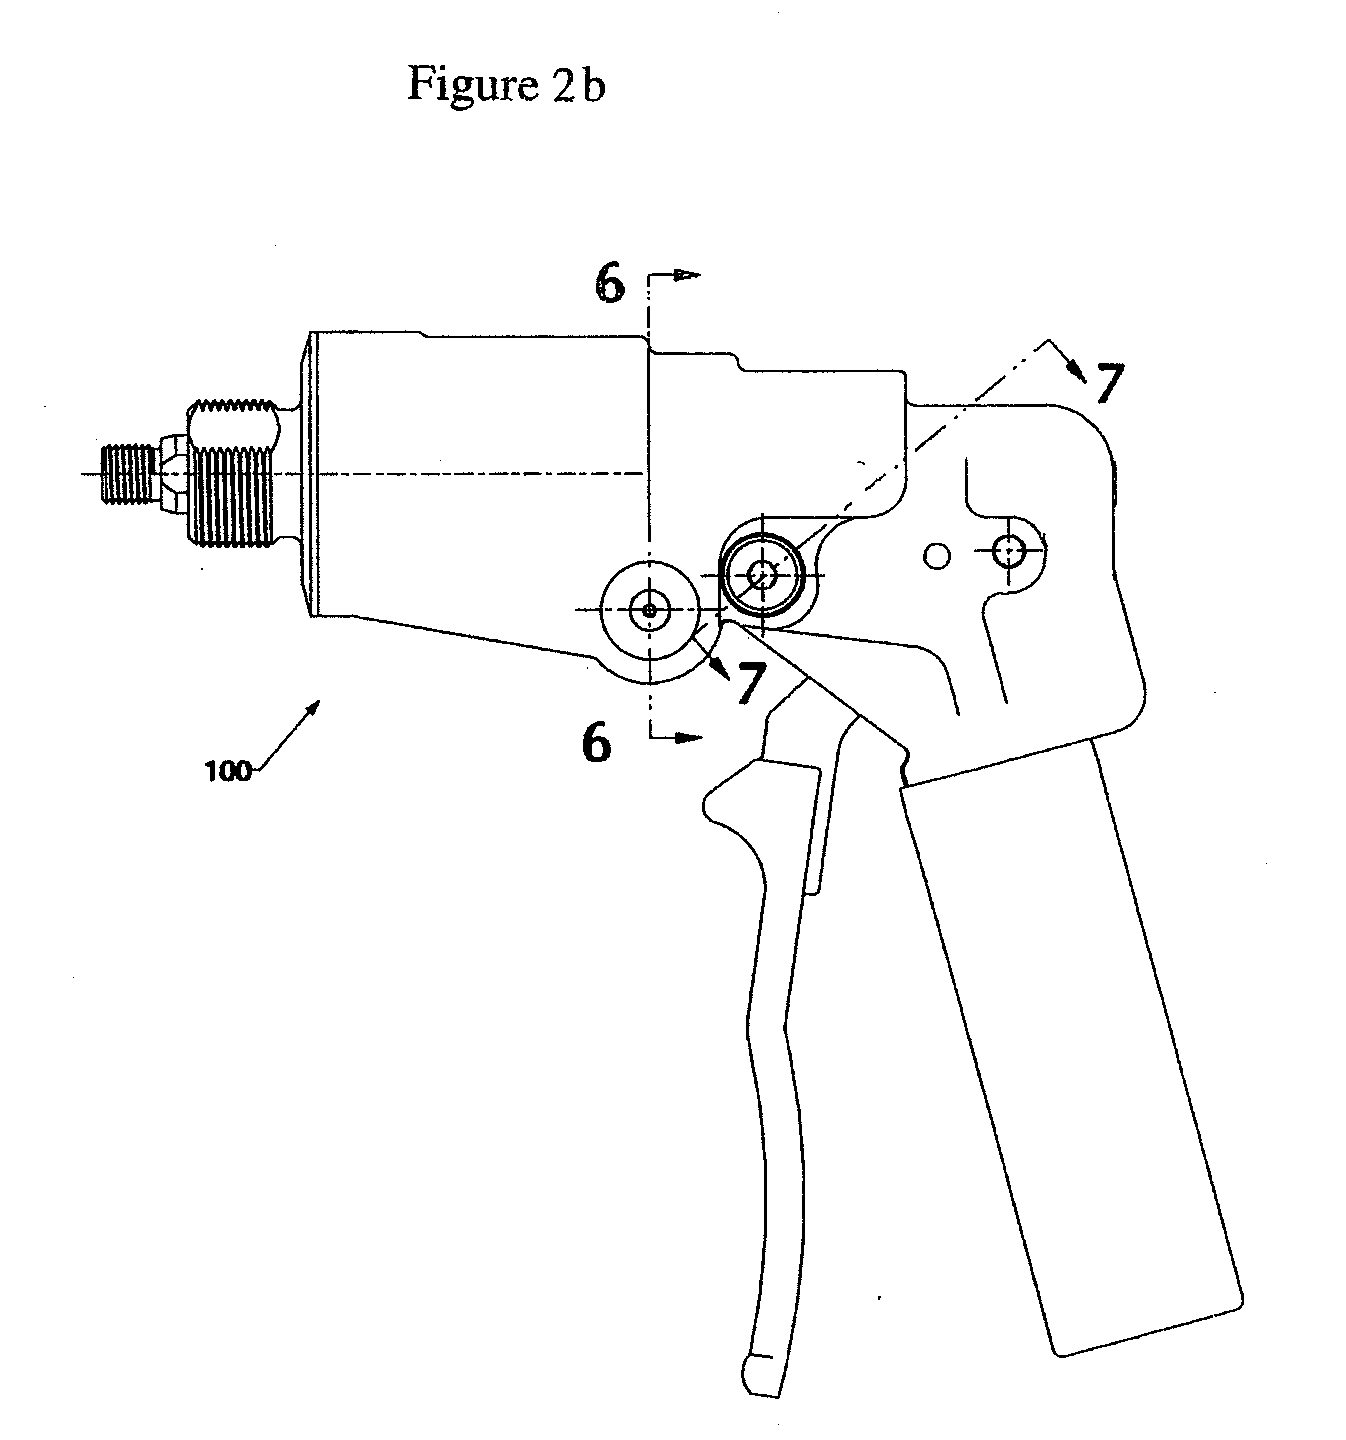 Hand-tool system for installing blind fasteners